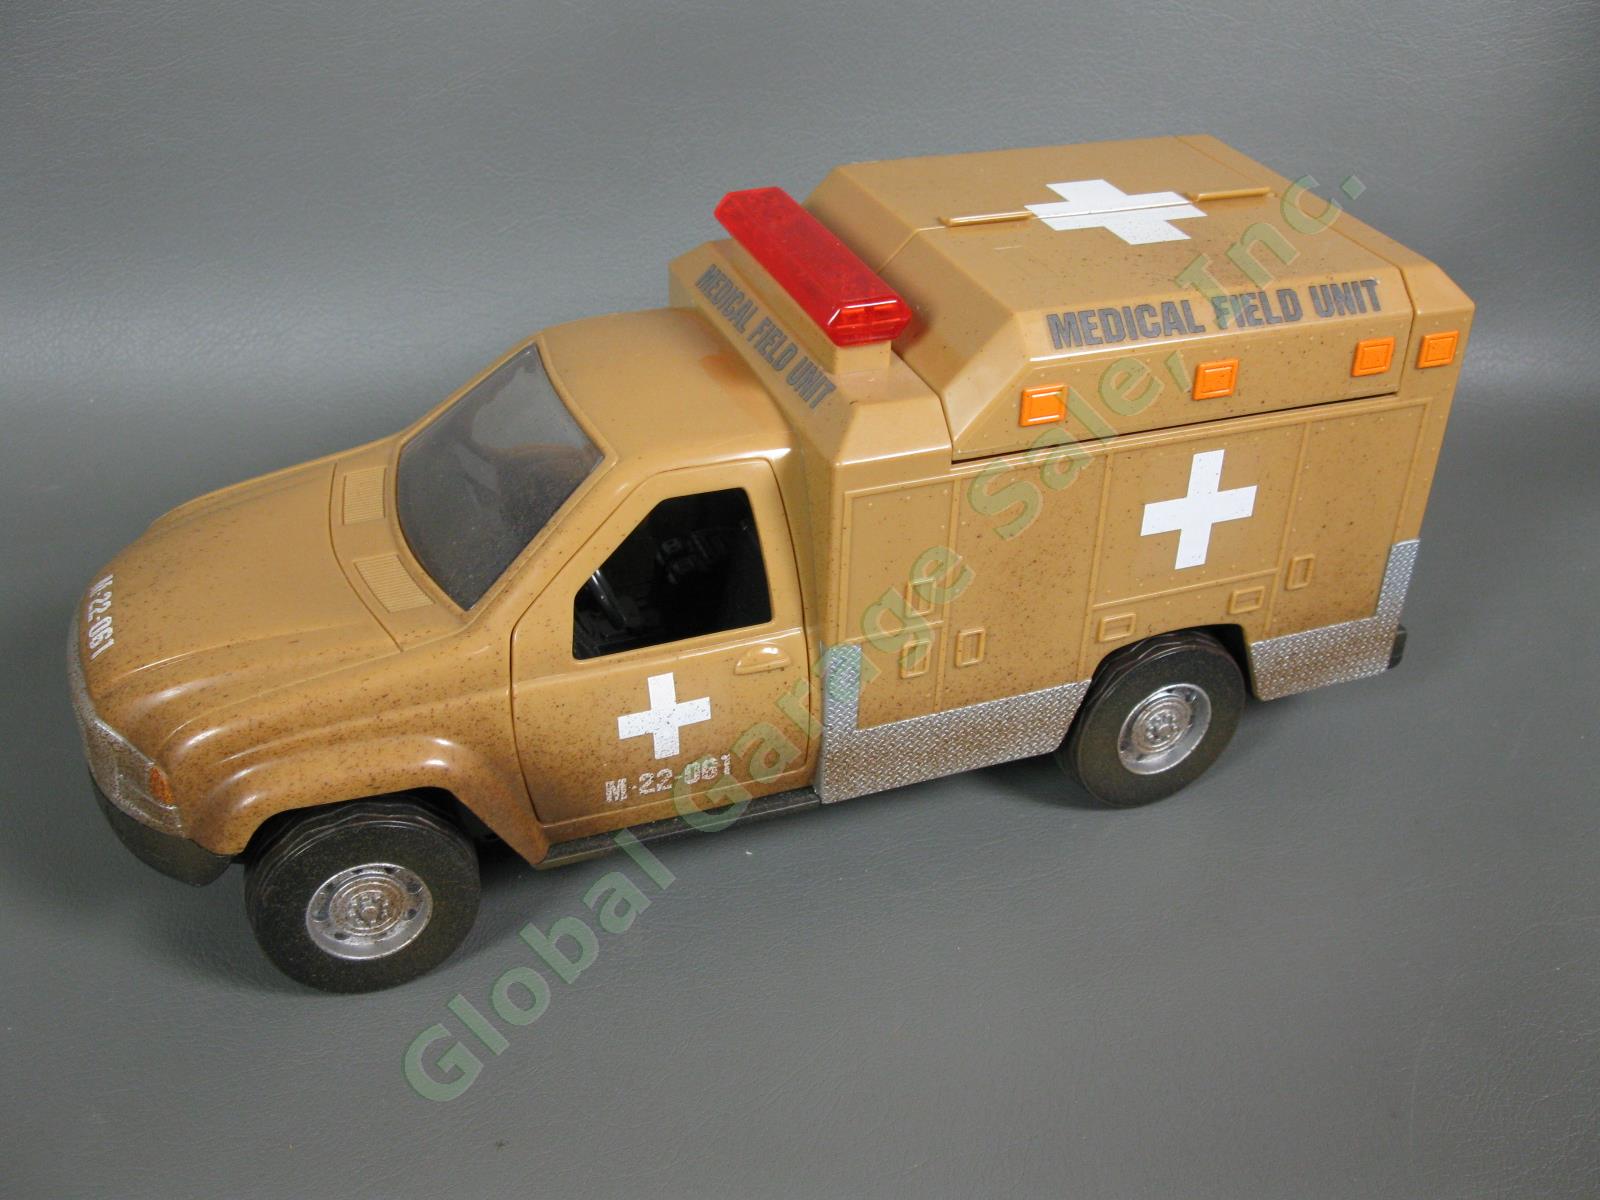 COMPLETE Lanard The Corps Mission Vehicle Medical Field Unit Ambulance Truck NR